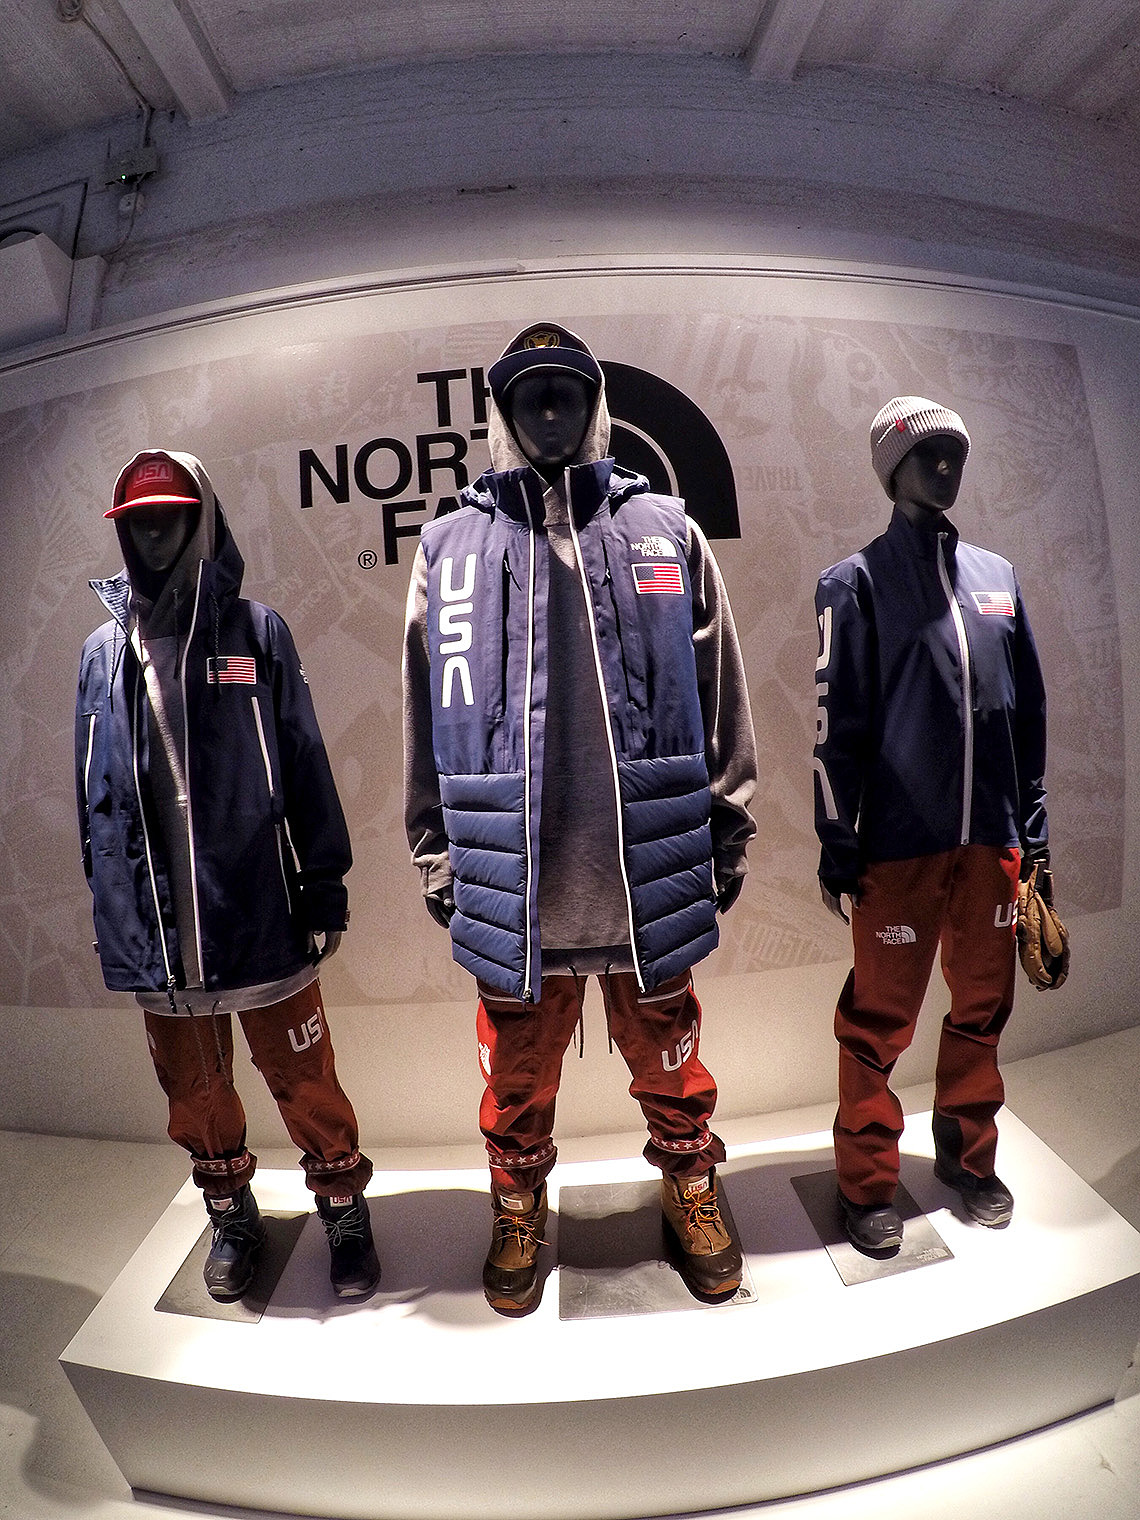 The 2018 US Freeskiing Olympic Team uniforms; The North Face outfits competitors in slopestyle, halfpipe and skier-cross.